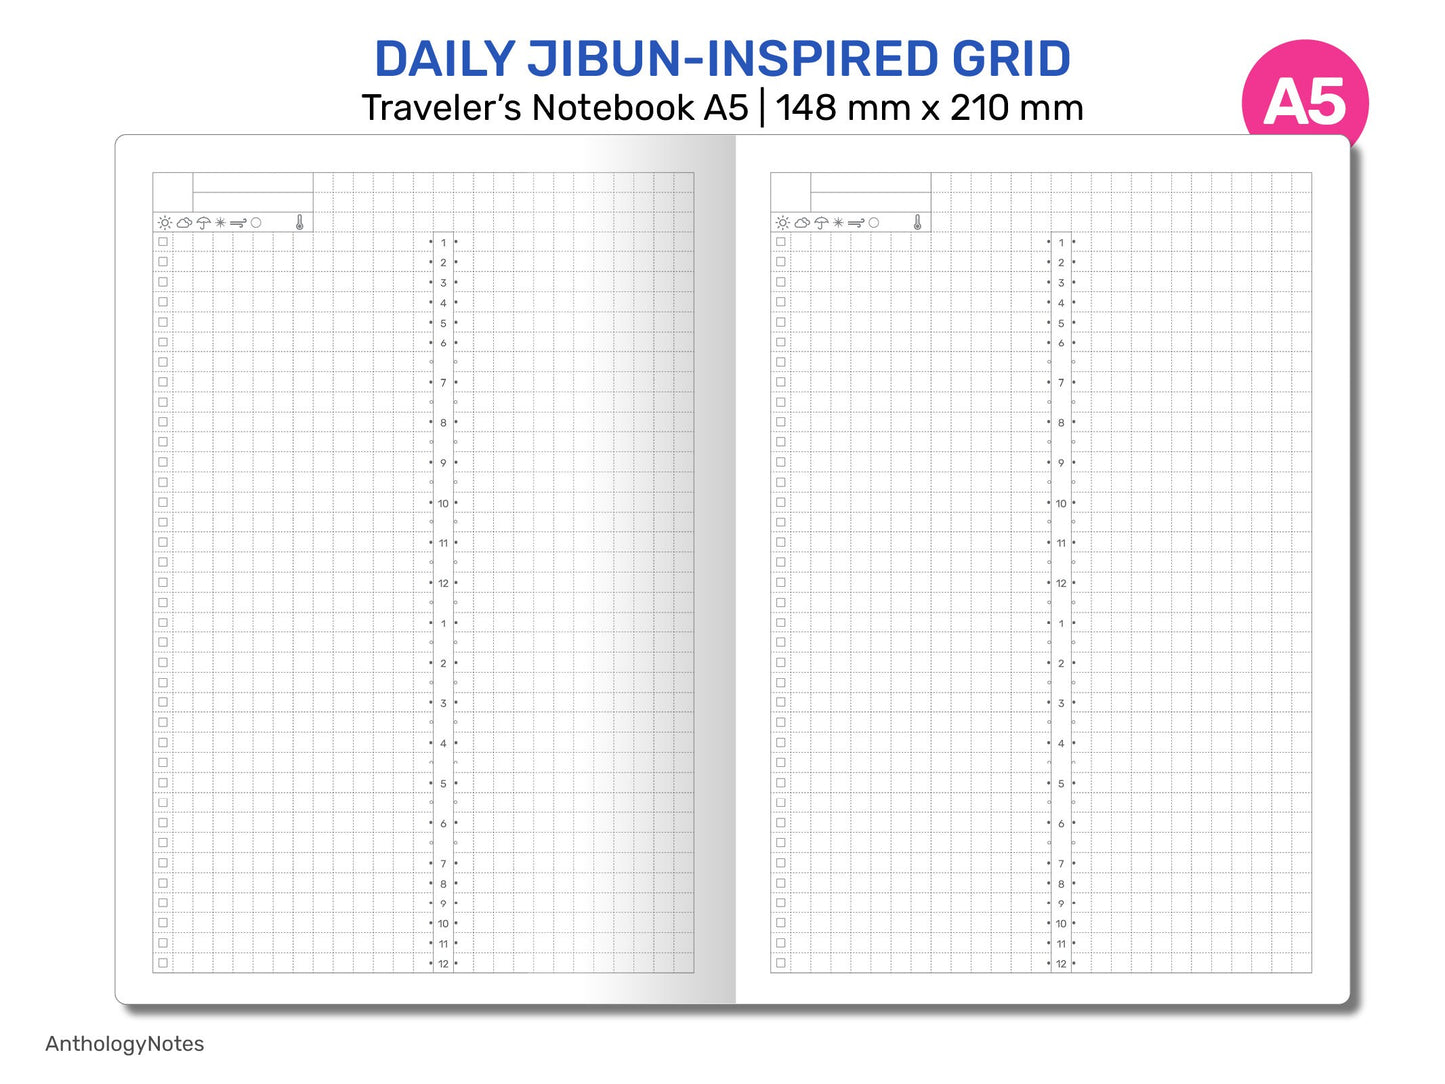 A5 Daily JIBUN-Inspired Daily Traveler's Notebook Printable Refill Insert A522-009